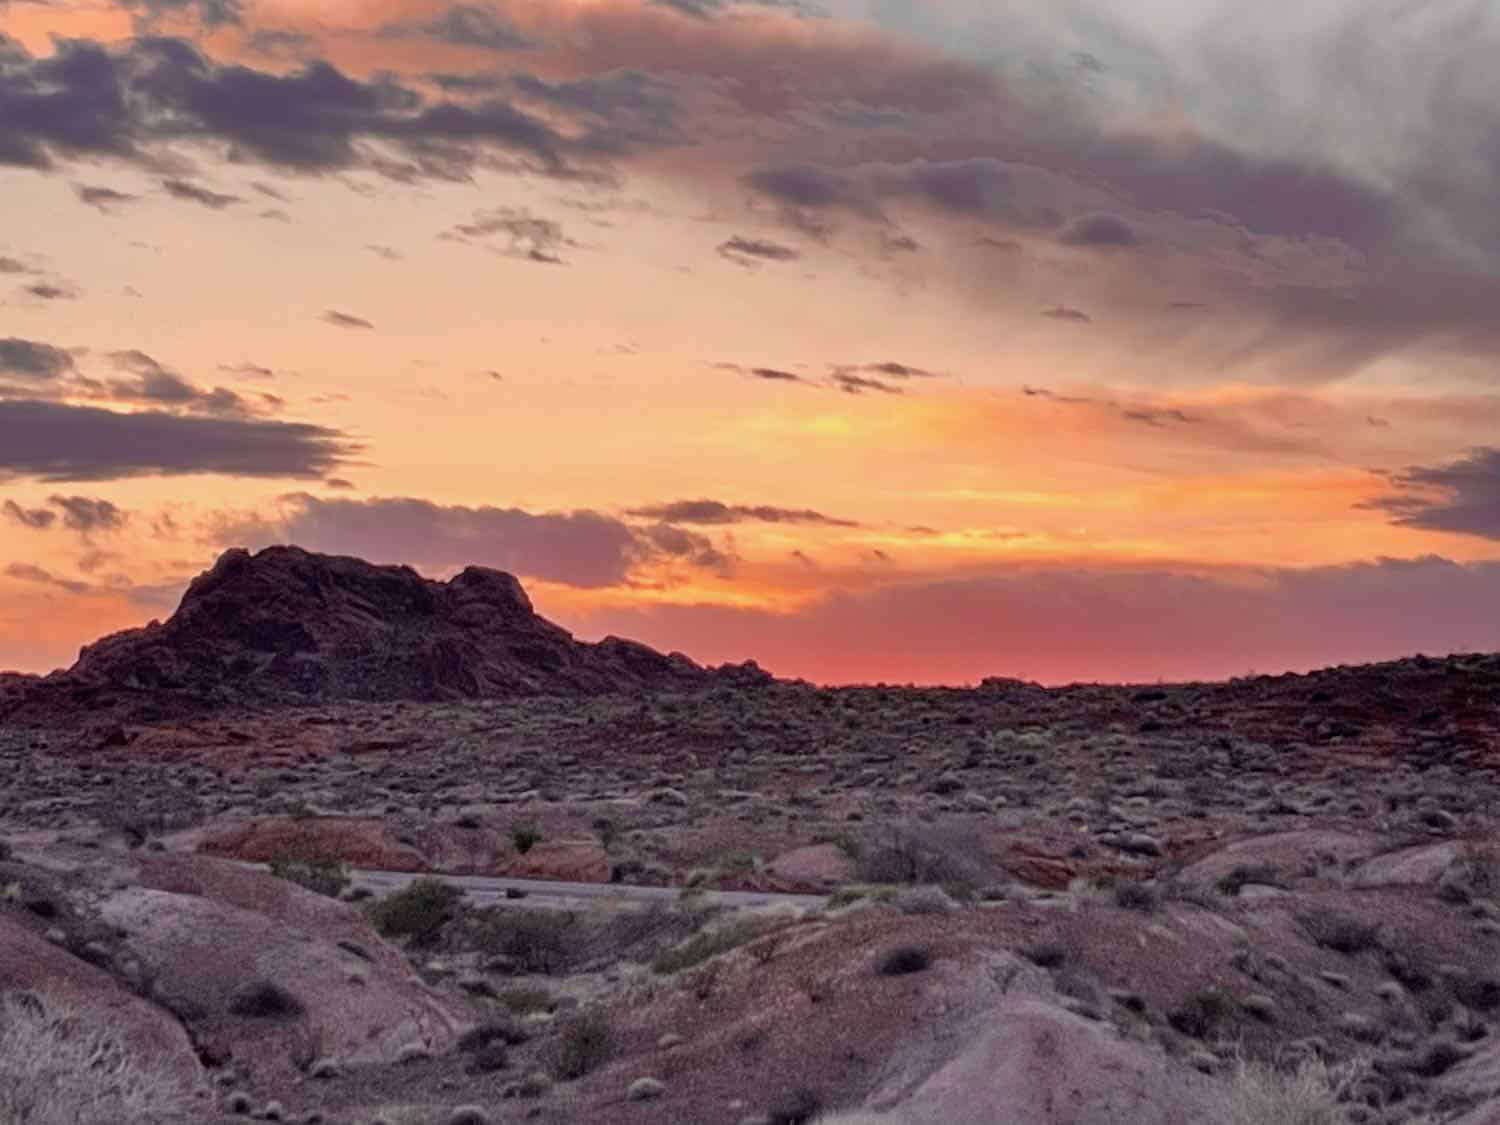 The last light of sunset glows pink at Valley of Fire State Park Nevada.